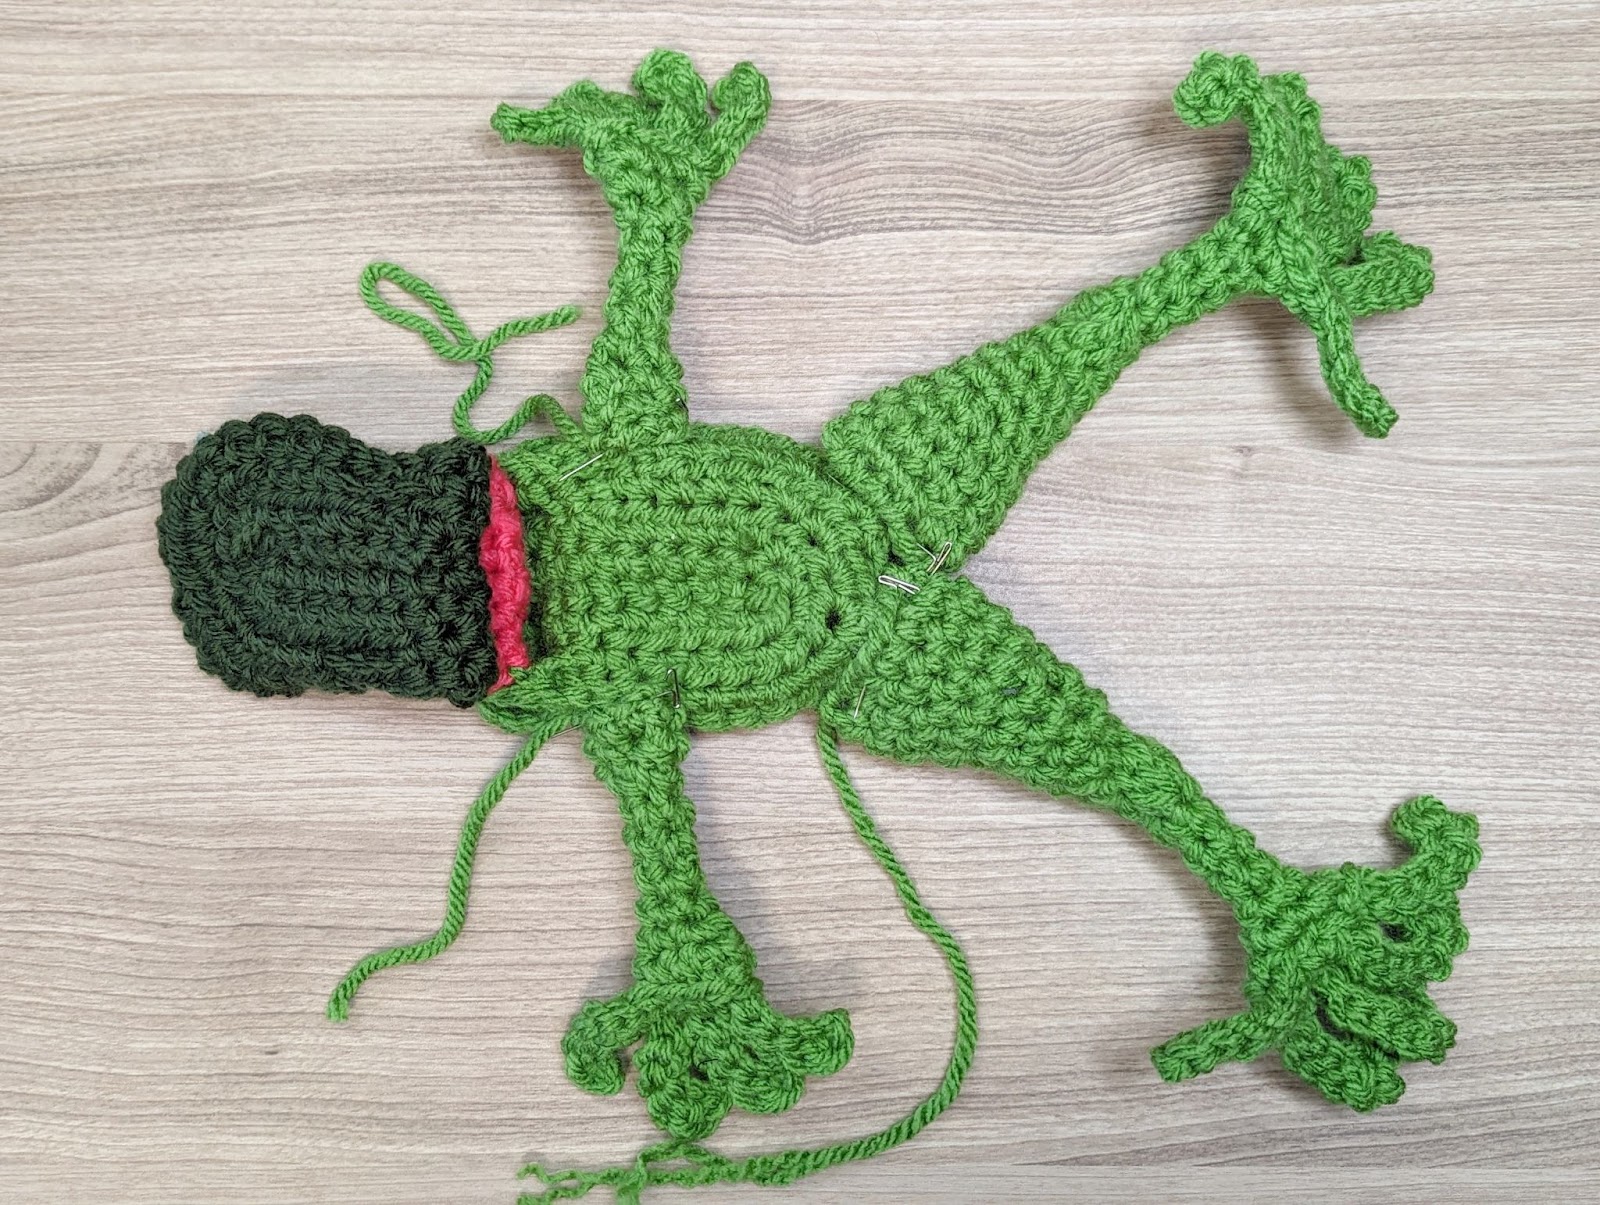 A handmade, green crocheted frog is laid out flat on a wooden surface. The frog's limbs are spread out and it has a red mouth with some loose green yarn strands around its body. The texture of the crochet is clearly visible.